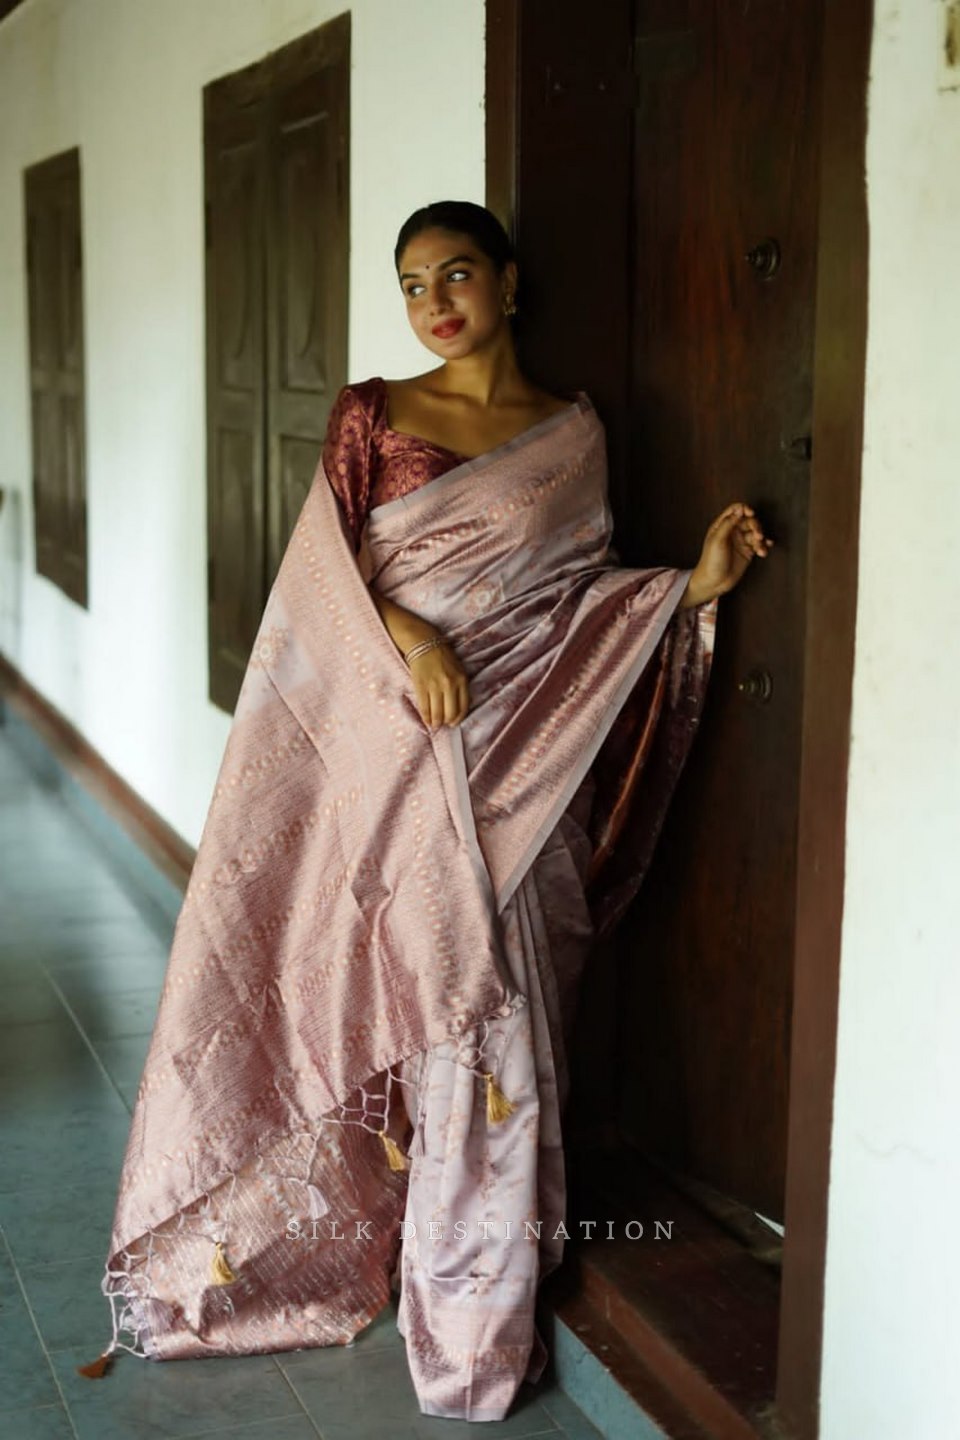 Taupe Tranquility: Taupe Gray Saree Featuring a Chocolate Brown Border and Intricate Design